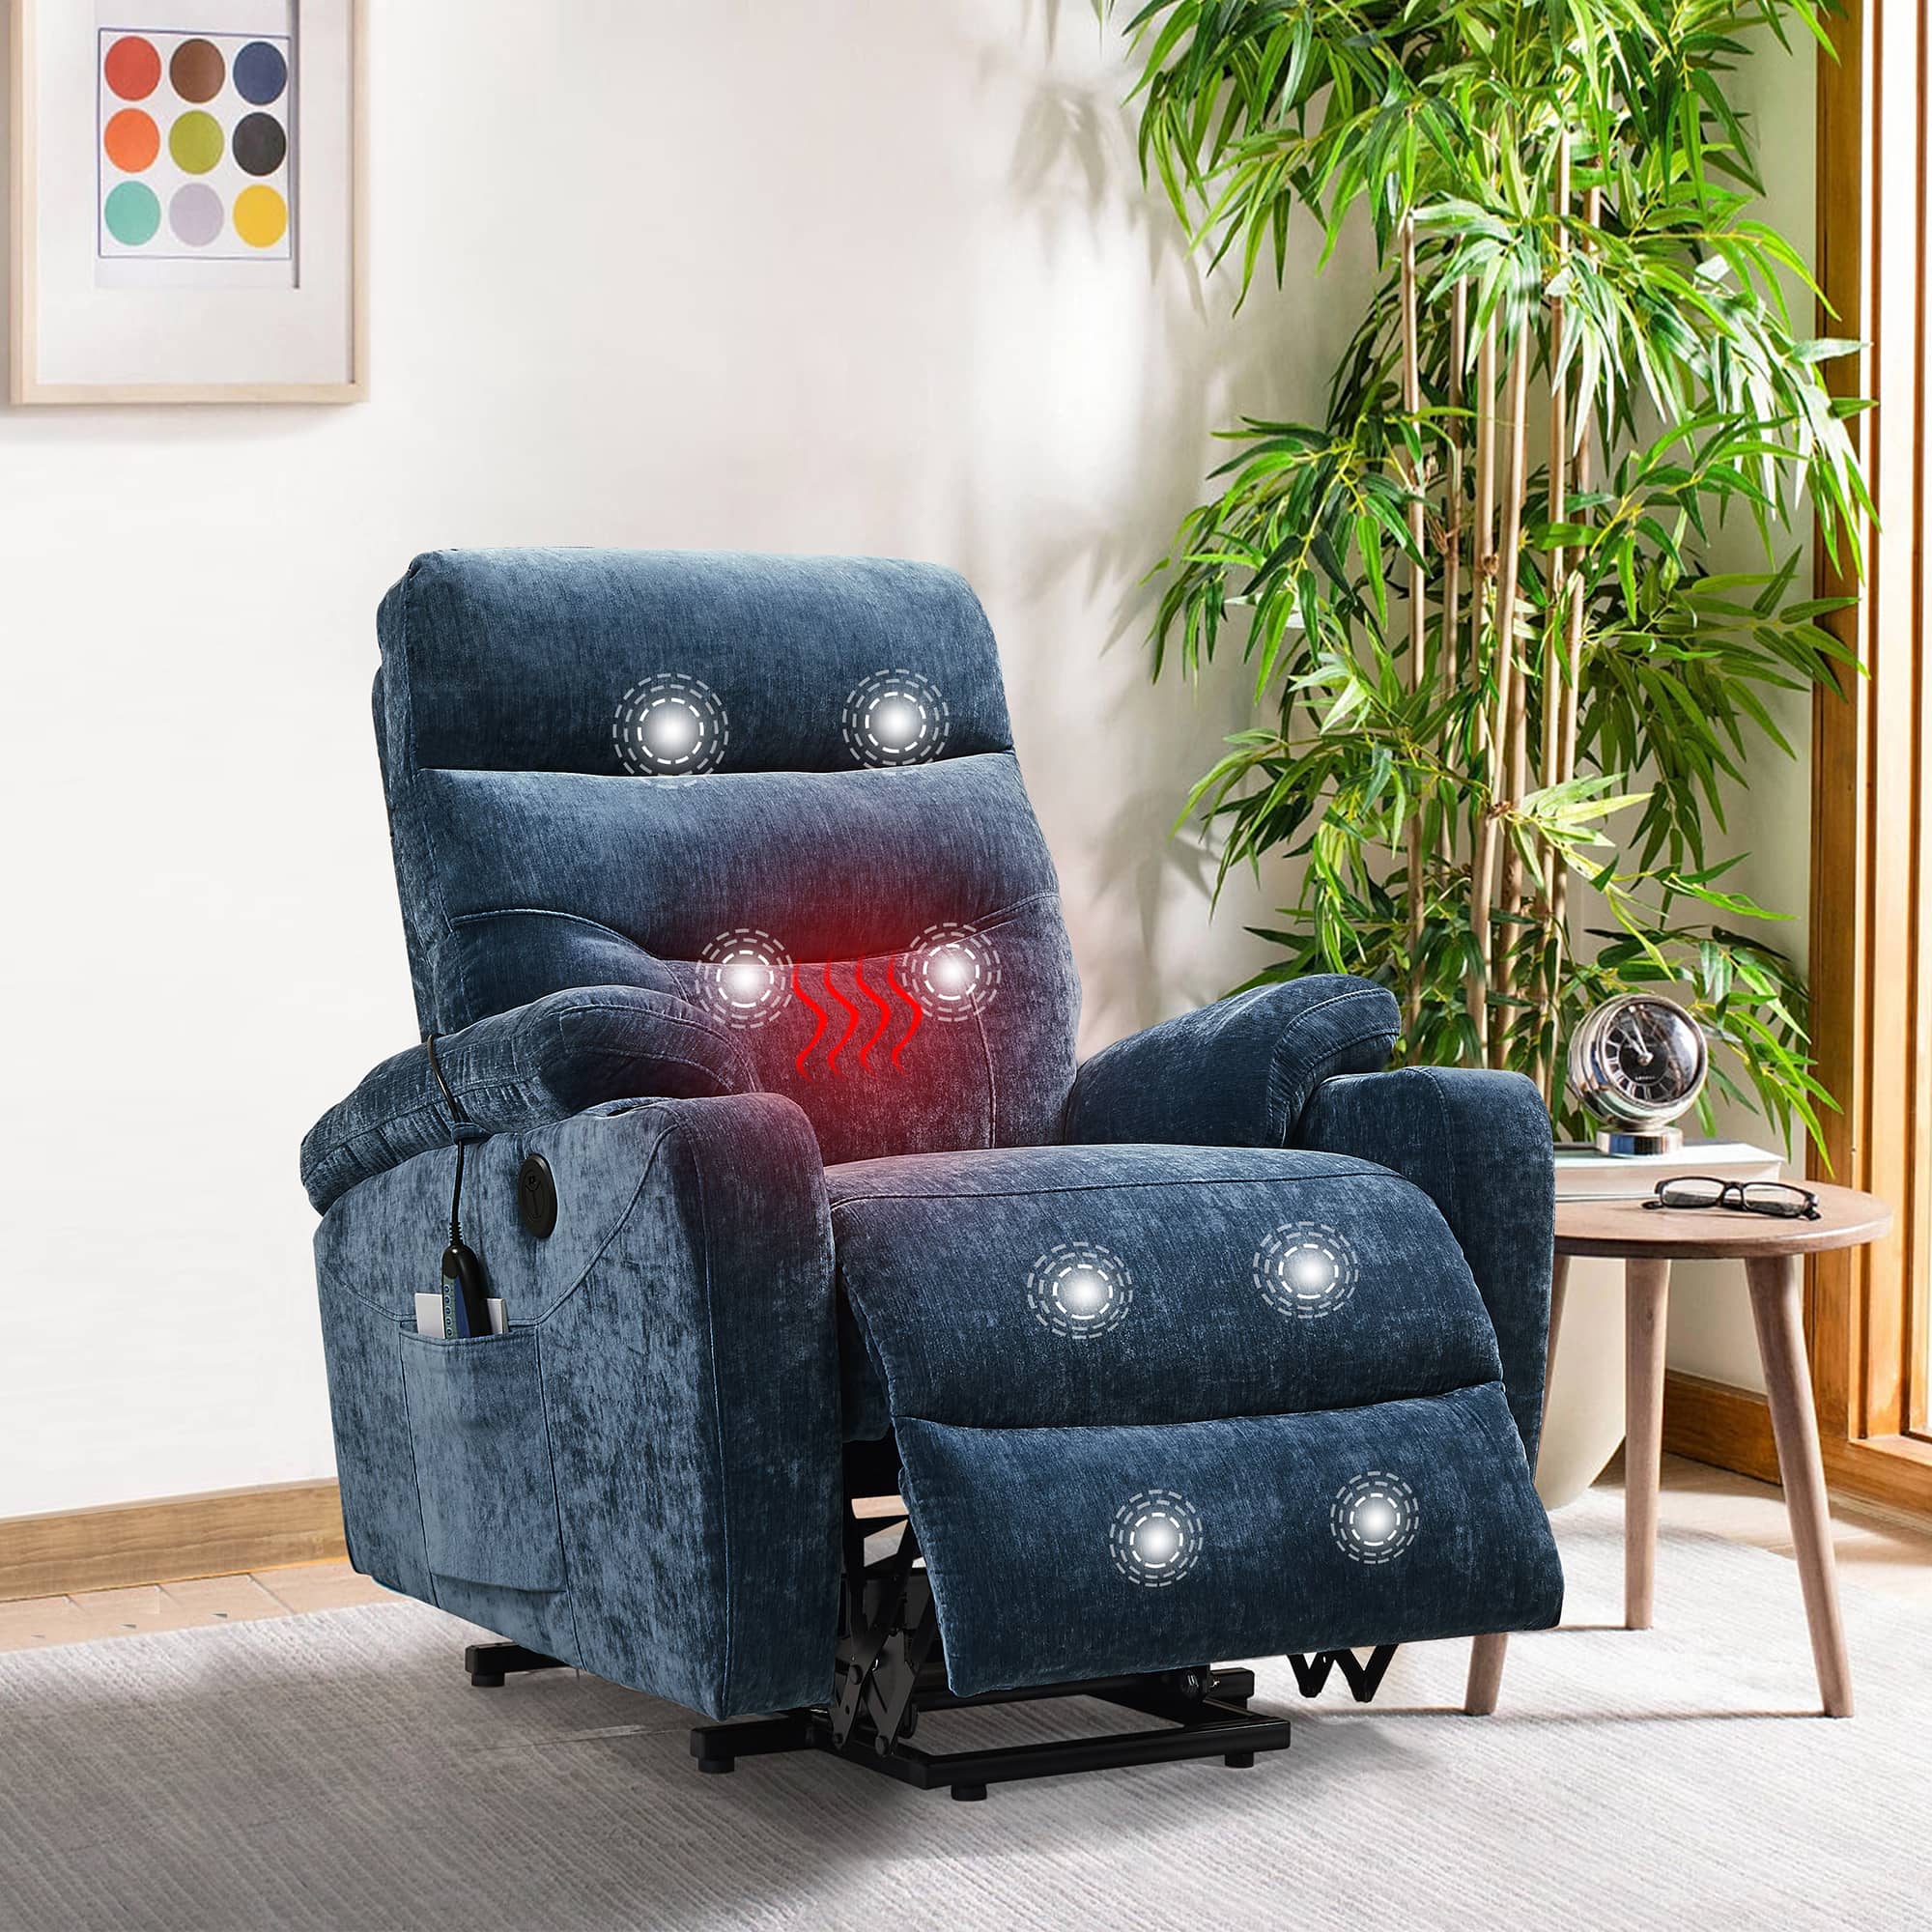 Blue Power Lift Chair Front Side Profile with Headrest and Footrest Raised Slightly and Massage Feature